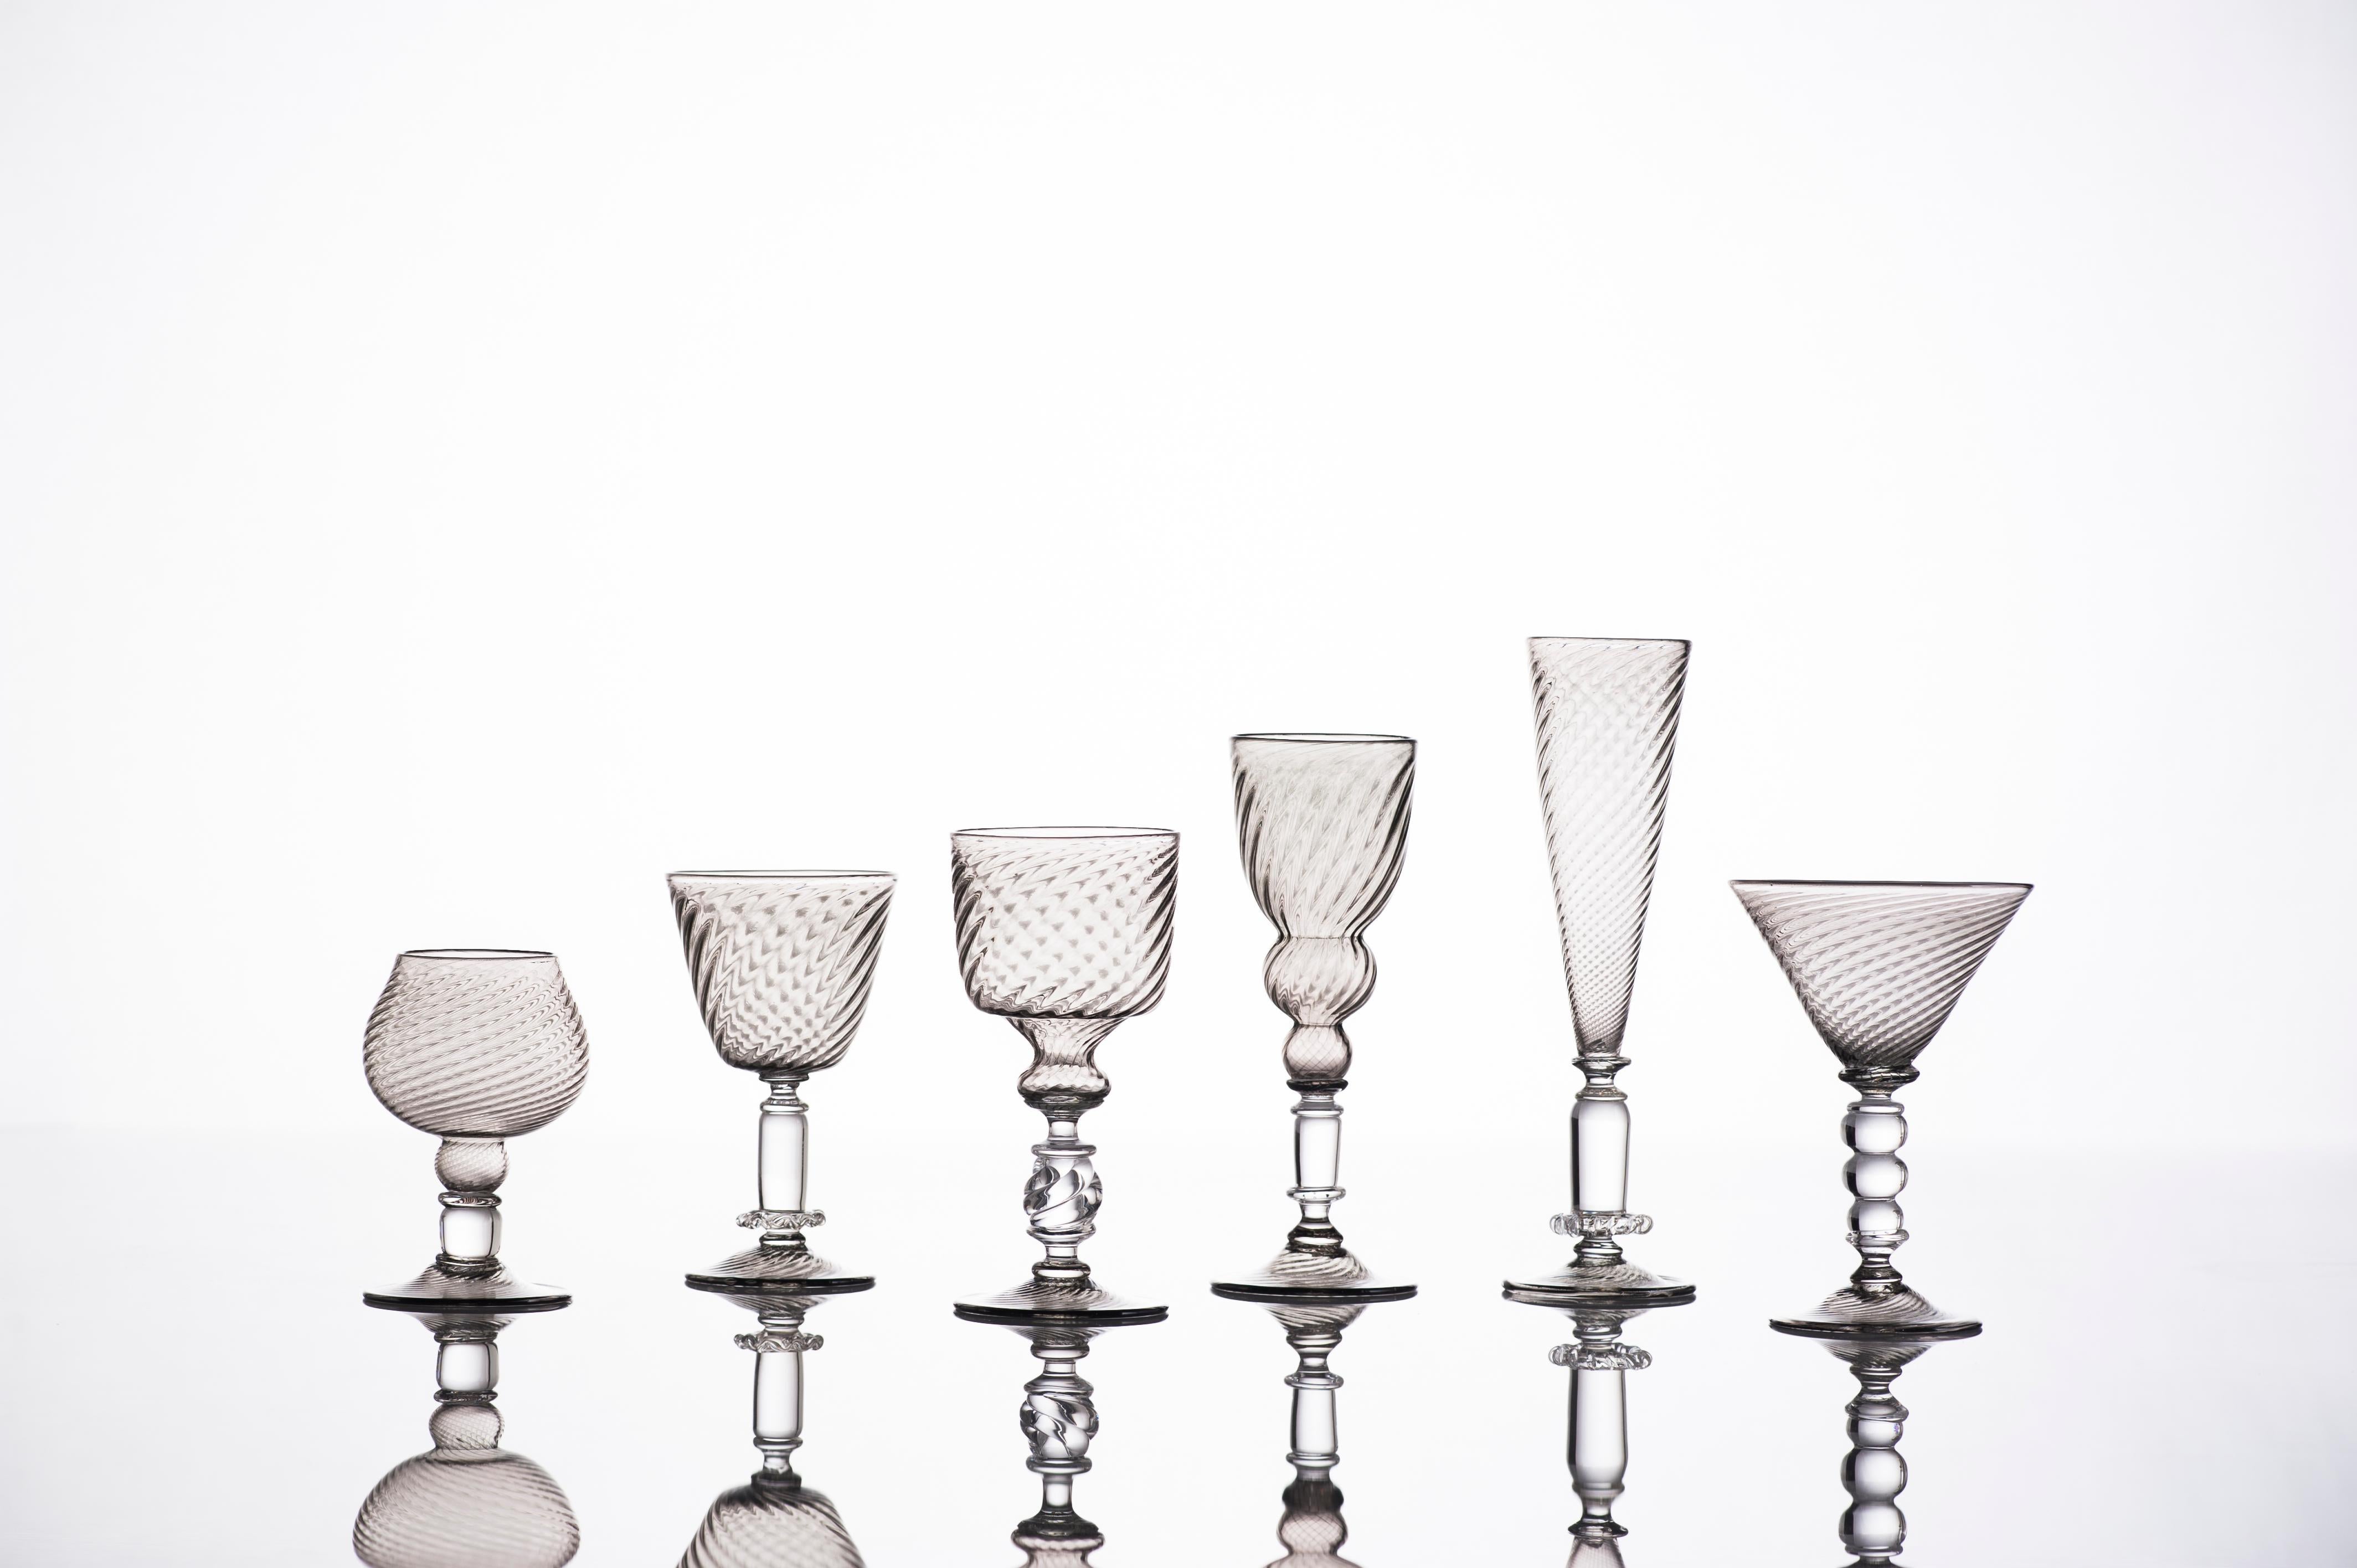 This timeless collection of stemware by Kazuki Takizawa makes a great gift or a sophisticated accent for your interior decor. Each piece is hand blown utilizing historical Venetian glassblowing techniques and uniquely designed with a modern twist.